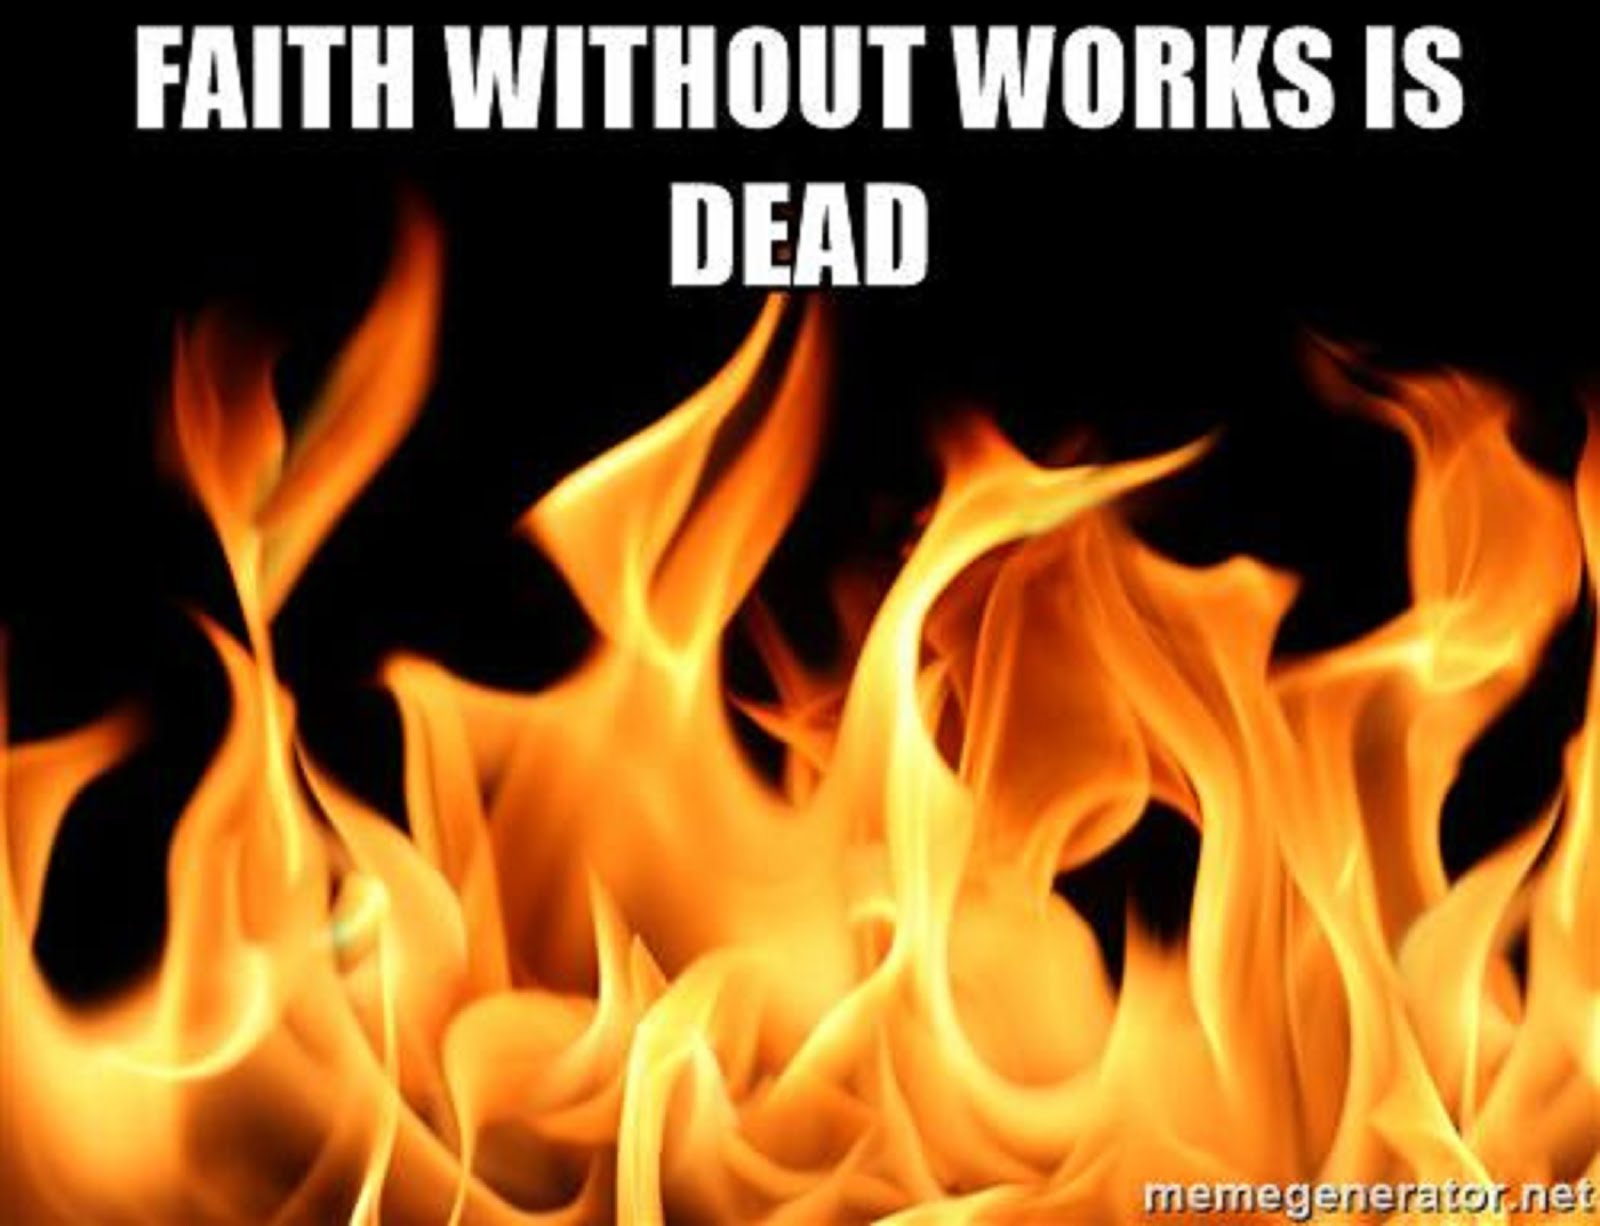 FAITH WITHOUT WORKS IS DEAD